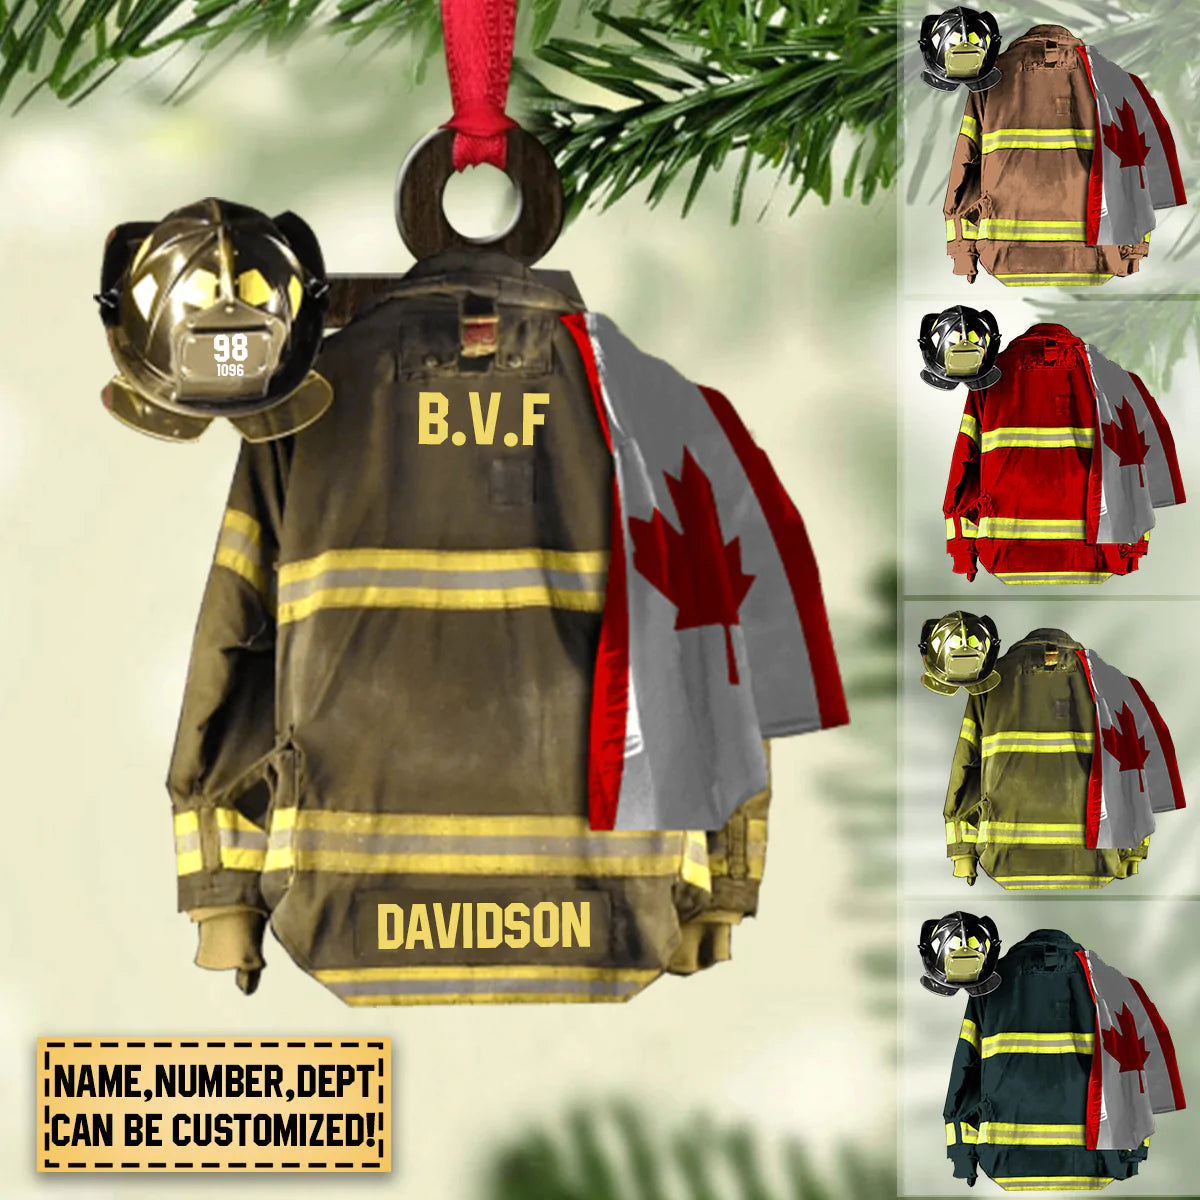 PERSONALIZED CANADIAN FIRE DEPARTMENT HANGING ORNAMENT